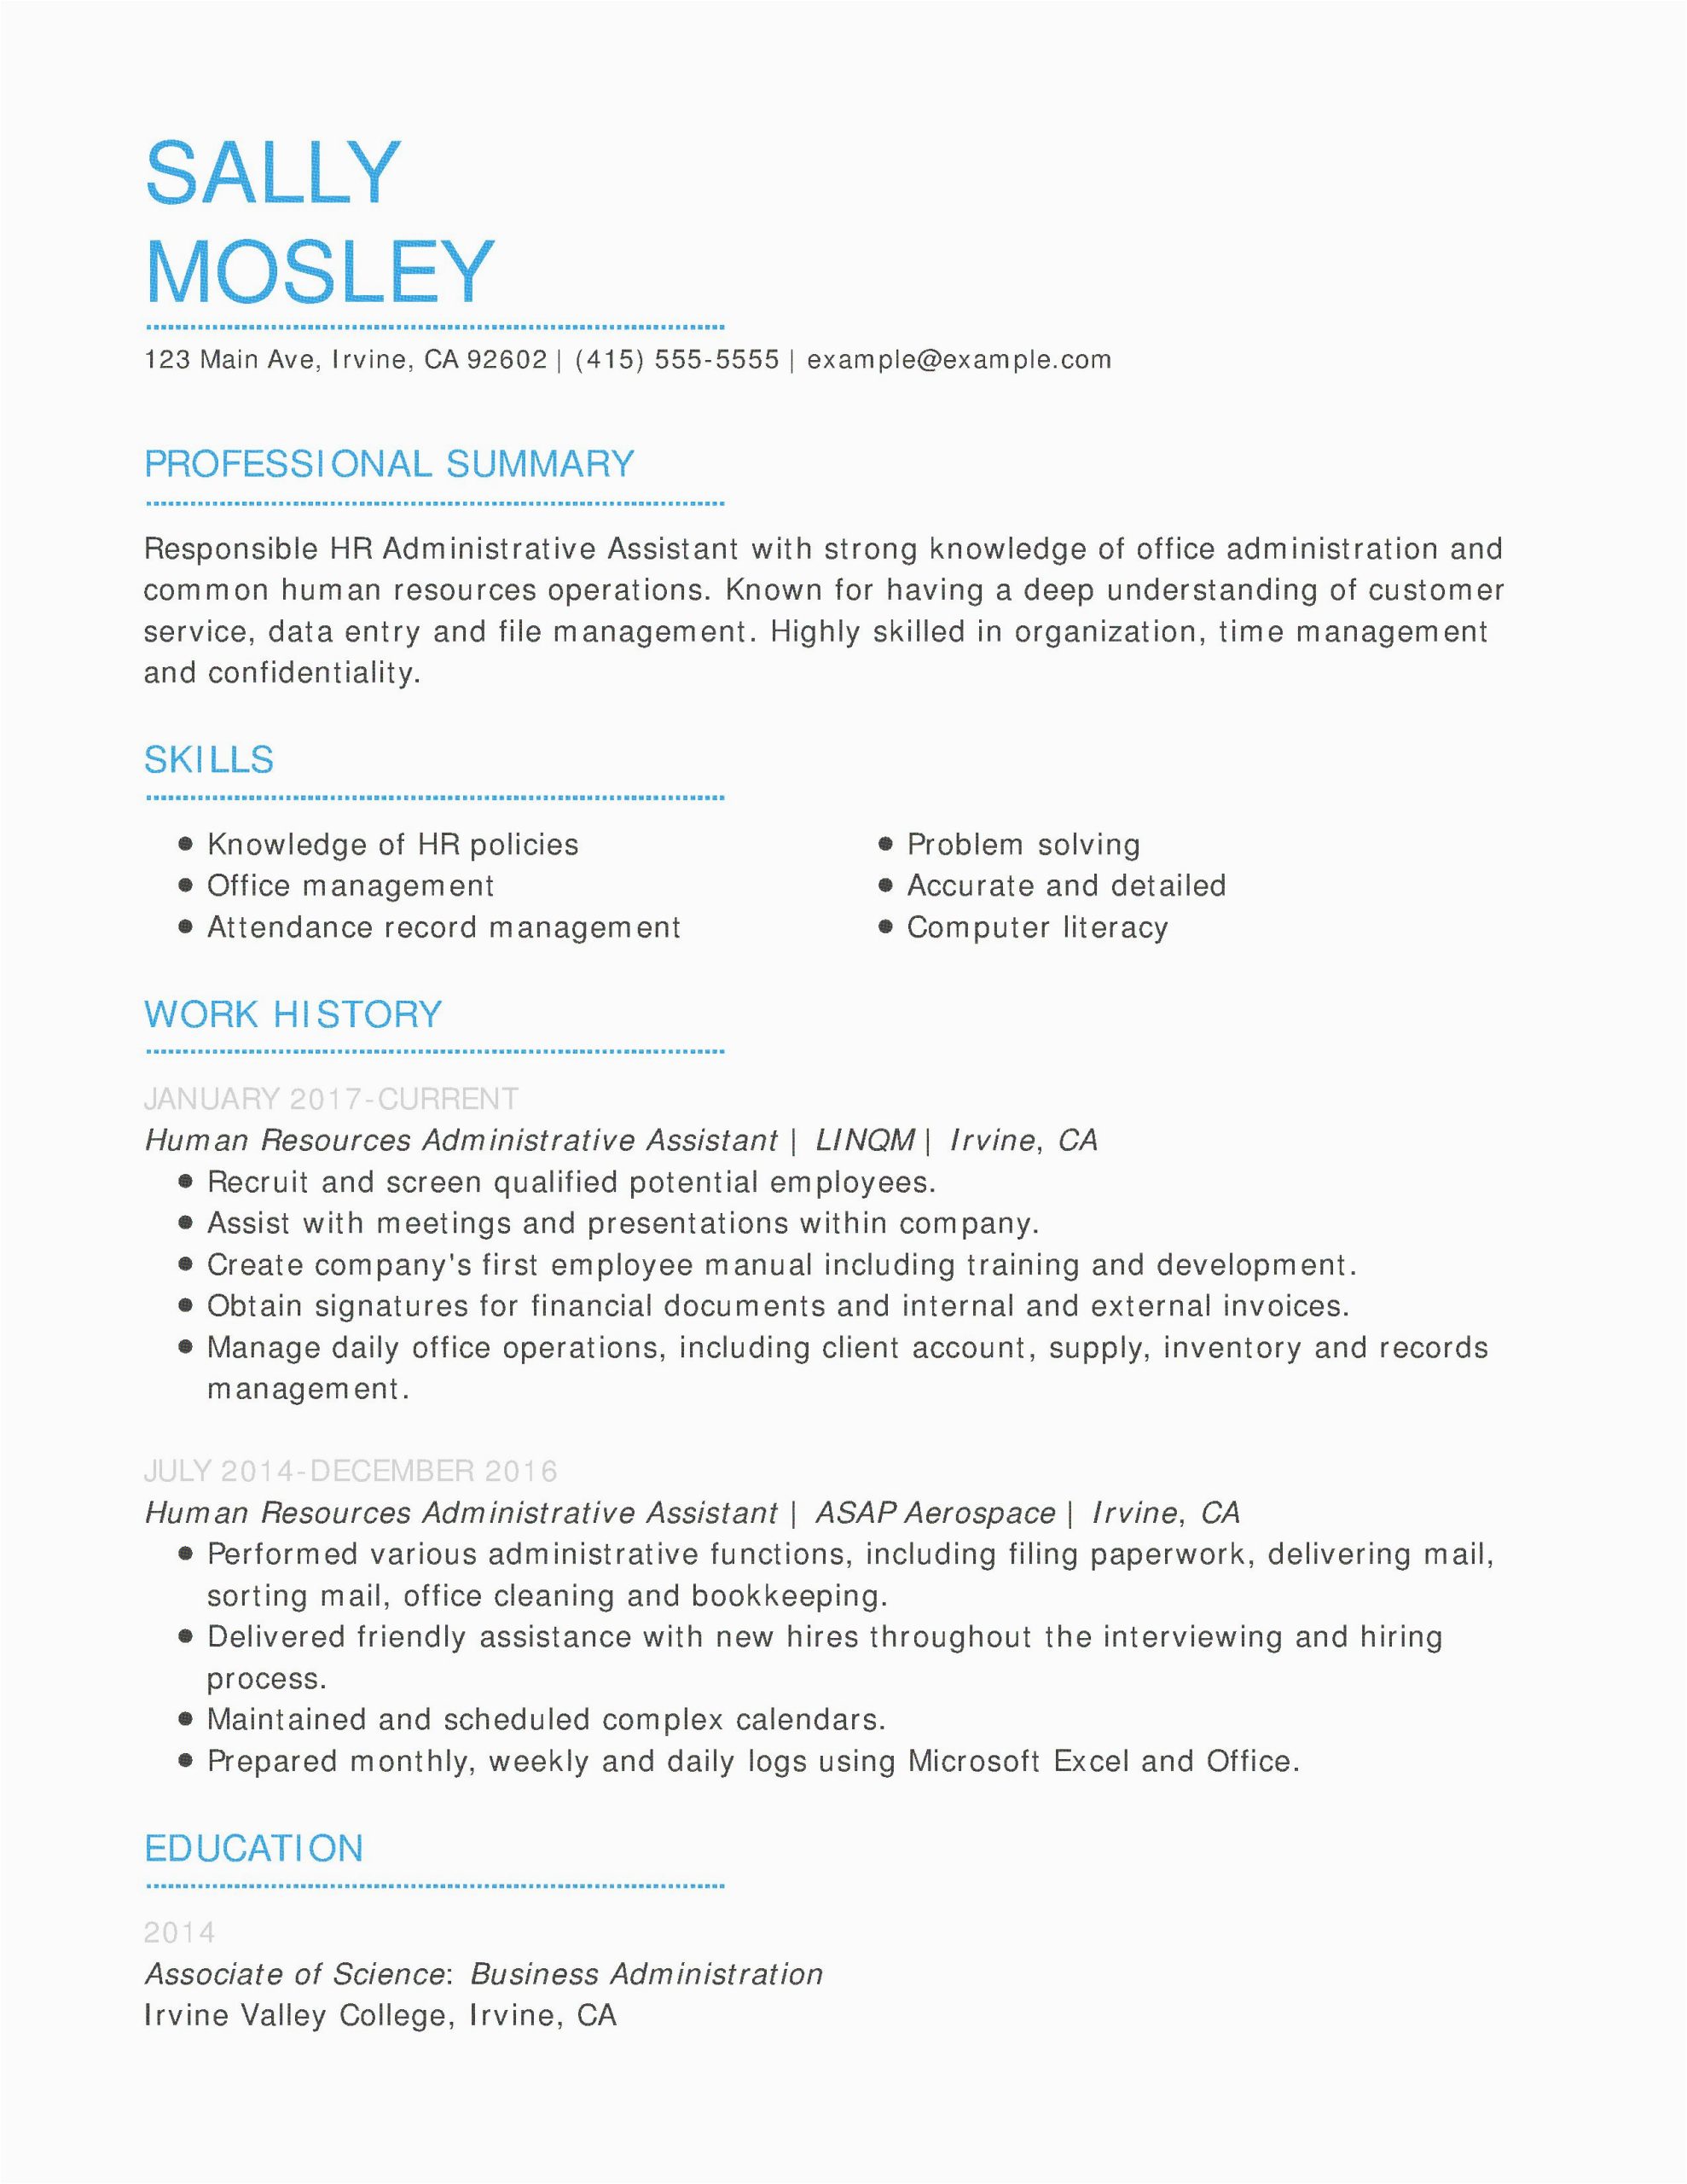 Sample Resume for Entry Level Hr Position √ 20 Human Resources Entry Level Resume In 2020